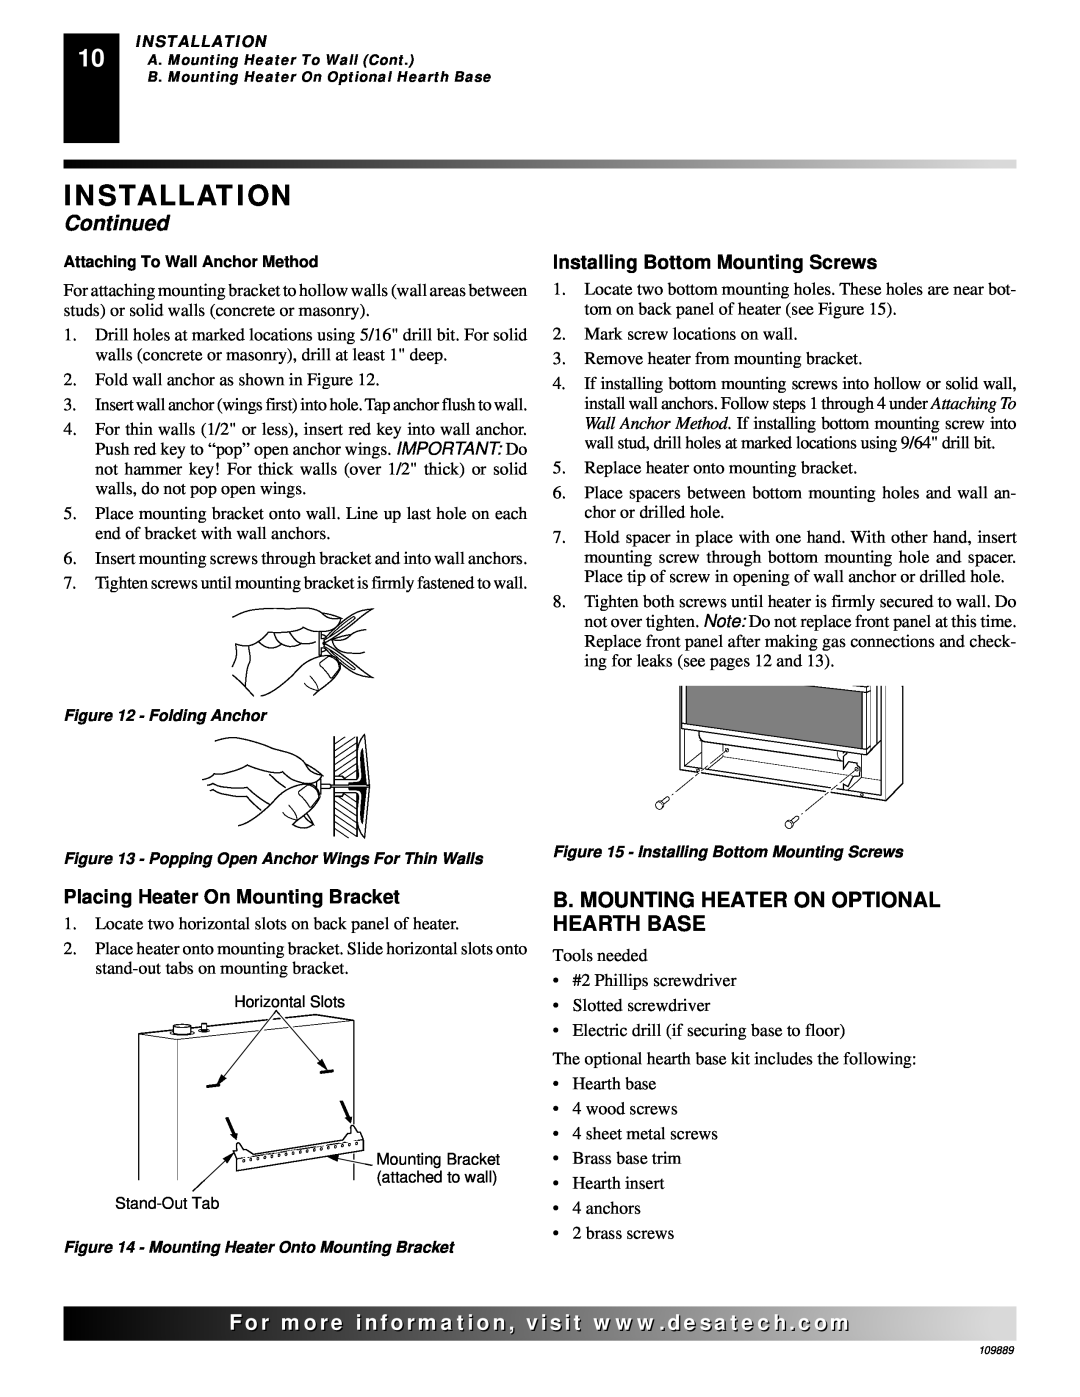 Desa VMH3000TPA B. Mounting Heater On Optional Hearth Base, Placing Heater On Mounting Bracket, Installation, Continued 